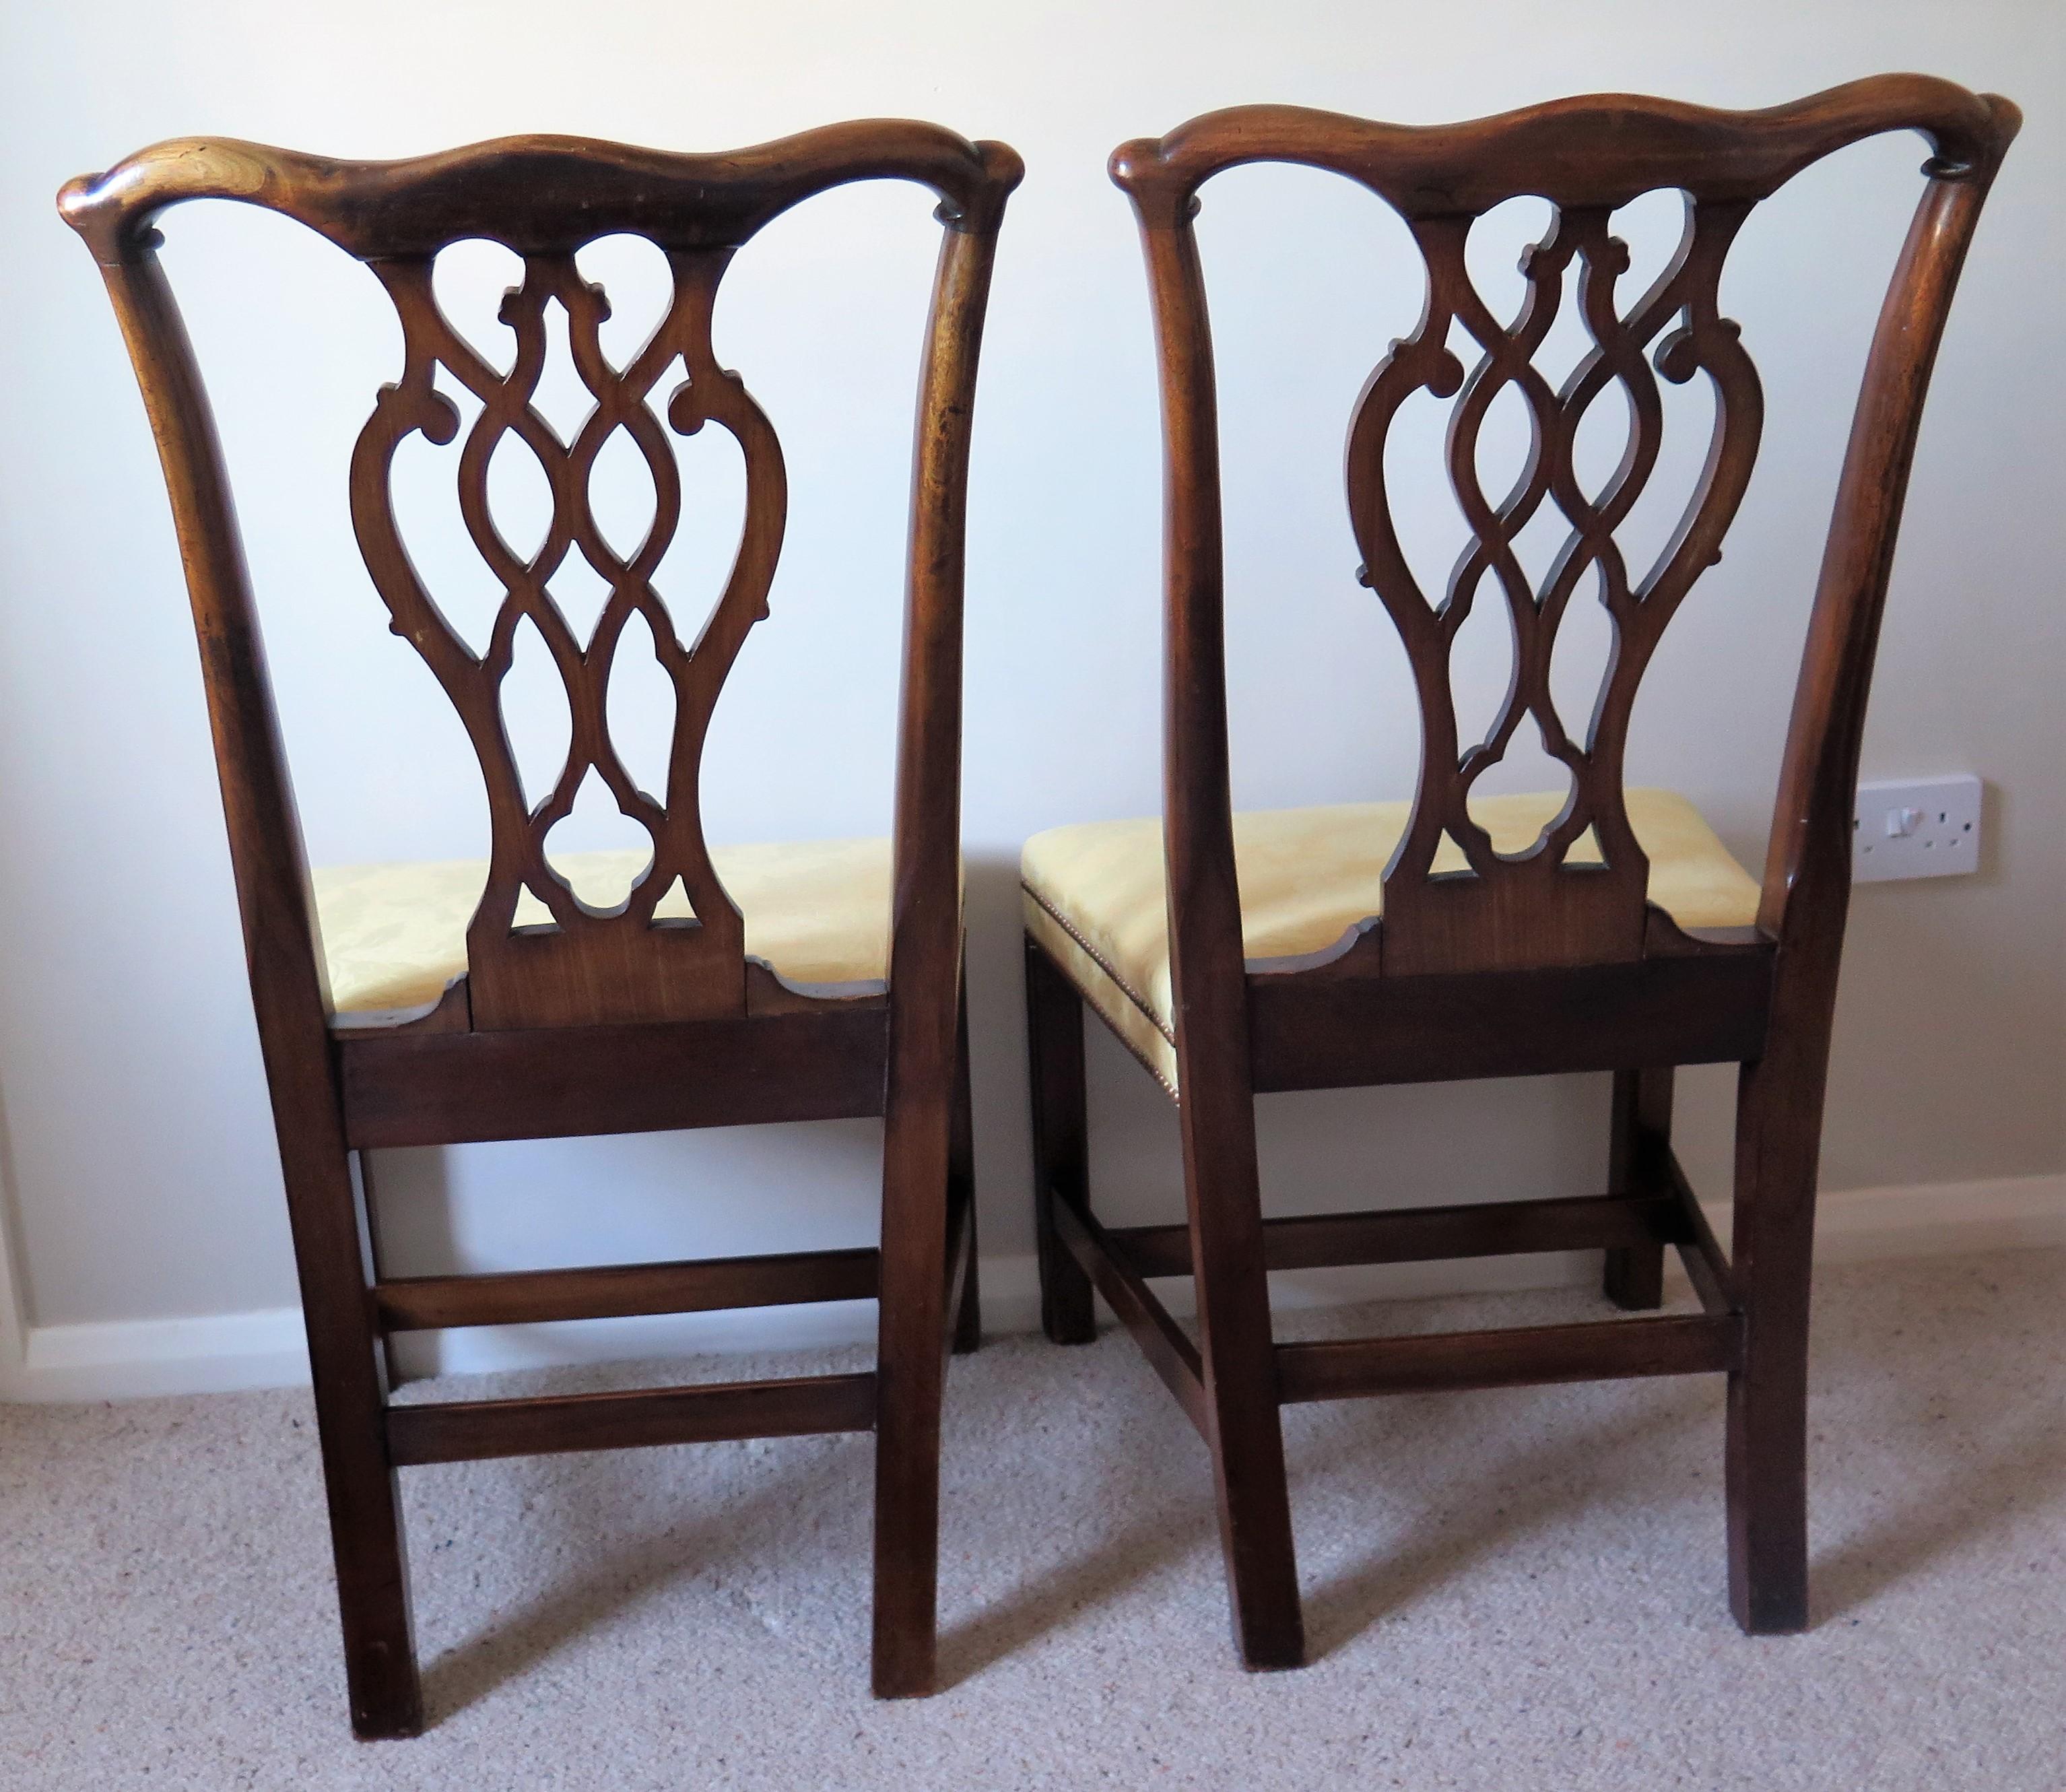 Fabric Pair of Elegant George 111 Mahogany Chippendale Chairs Reupholstered, Circa 1770